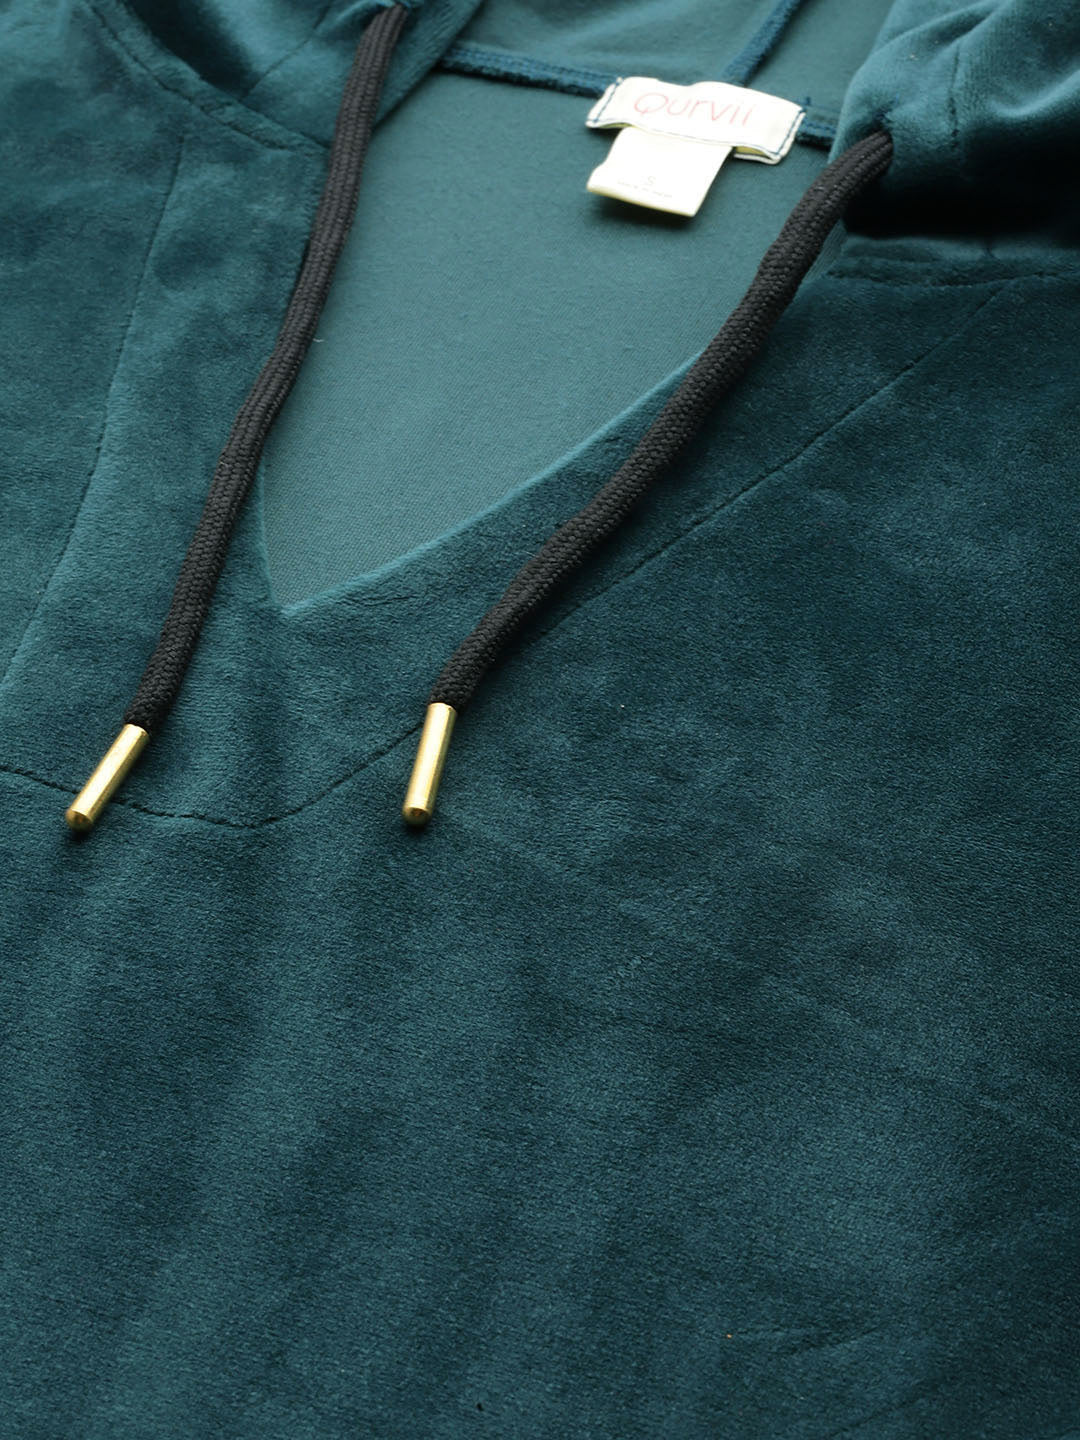 Teal solid velvet fabric with a front patch pocket. hoodie with co-ord set.